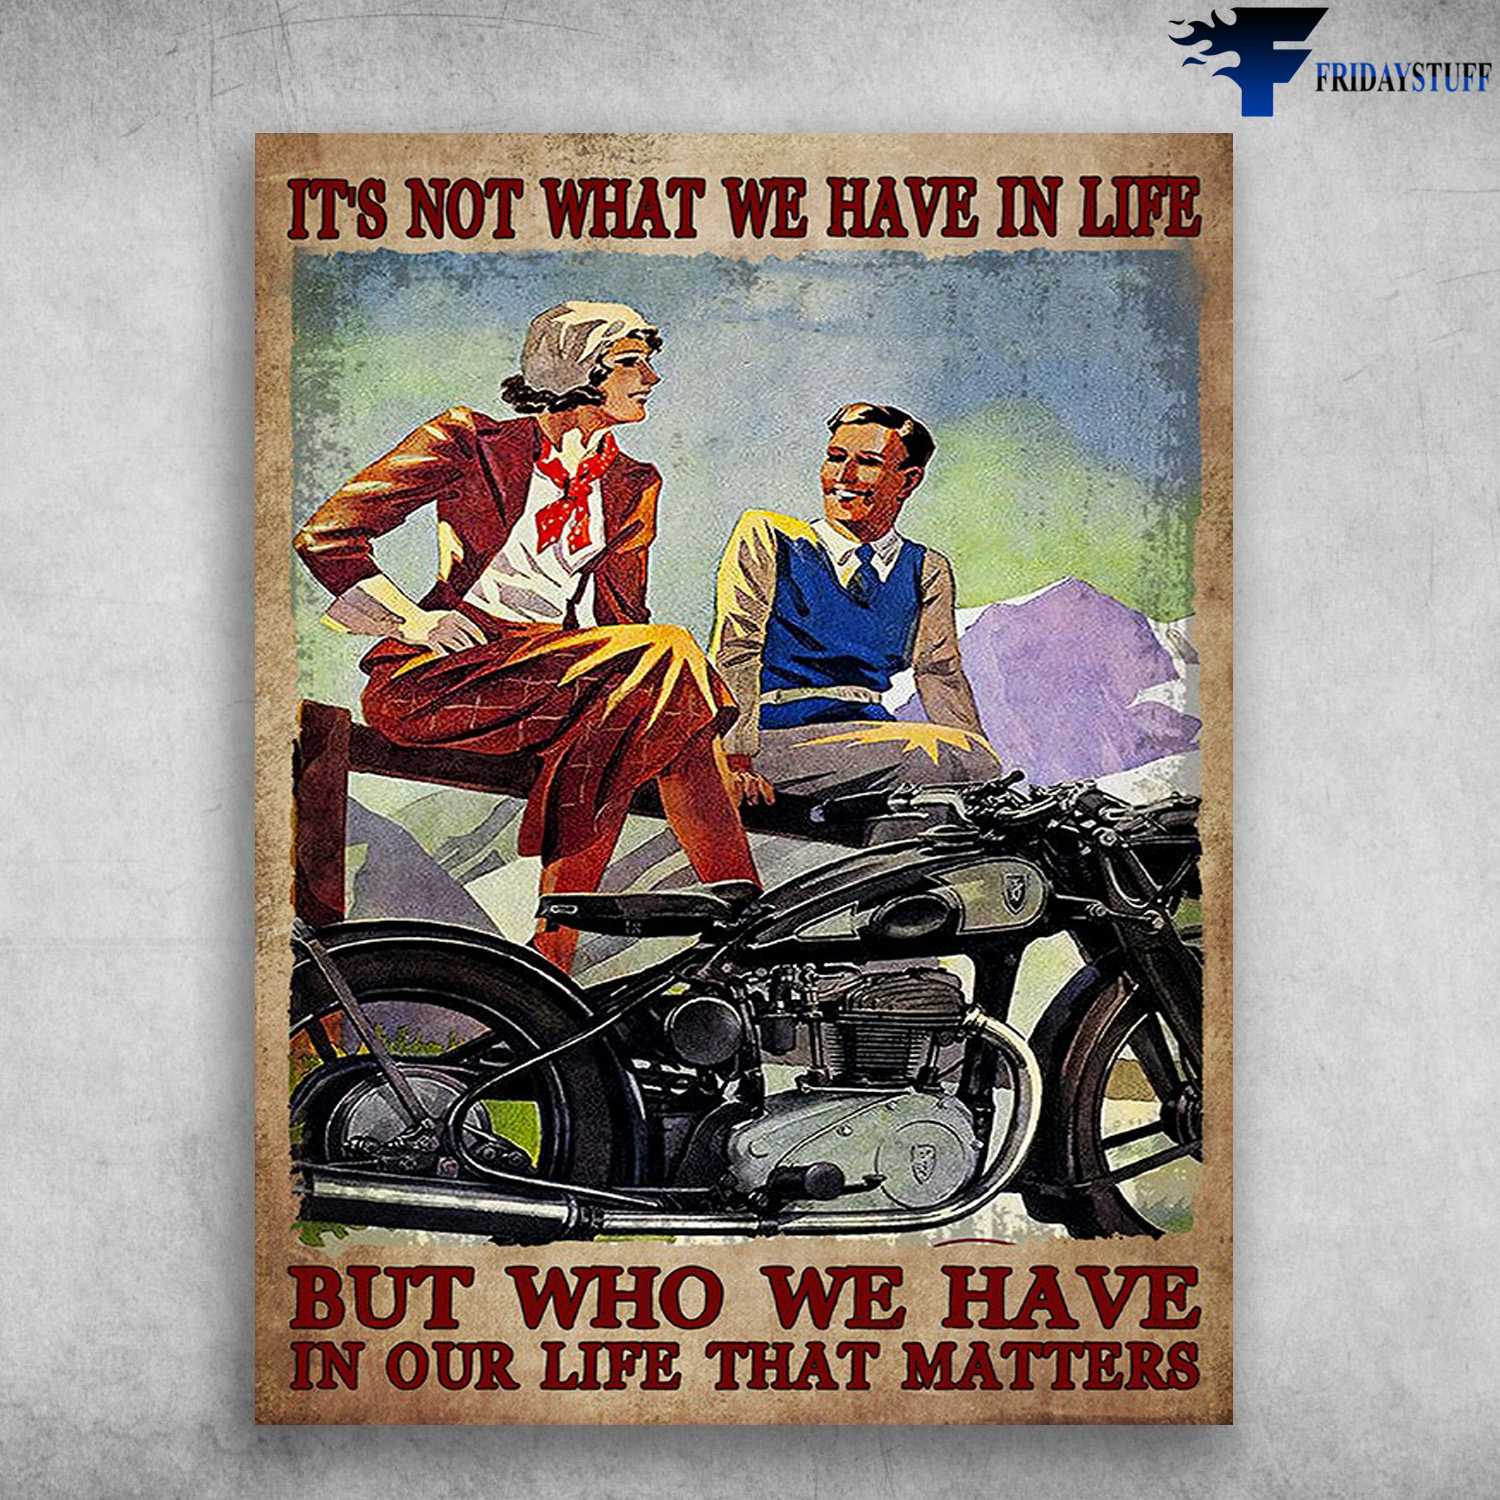 Motorcycle Couple, Biker Poser - It's Not What We Have In Life, But Who We Have, In Our Life That Matters